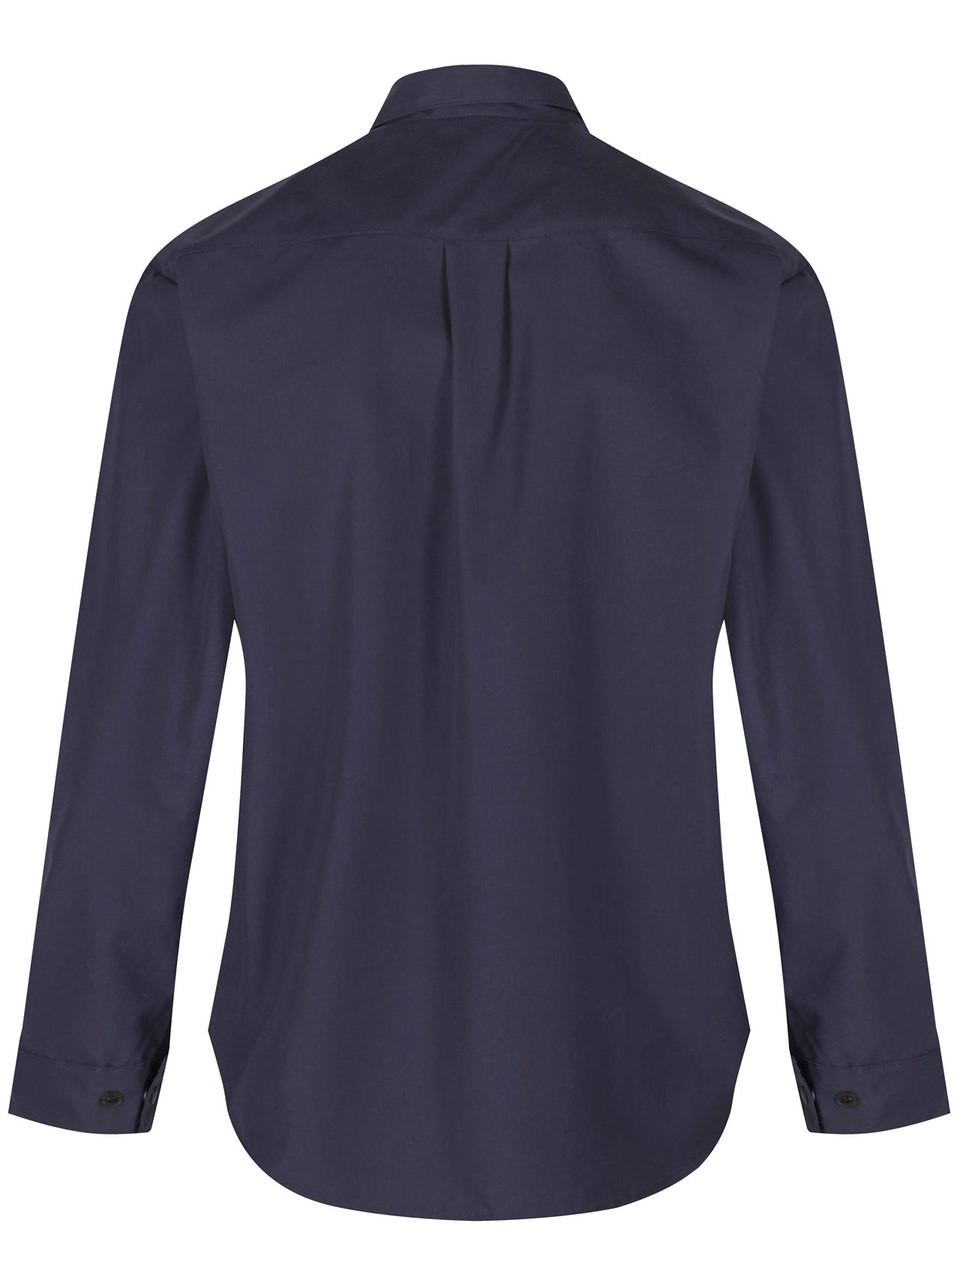 Kintail Shirt in Single Ventile® - comfortable fit and natural material